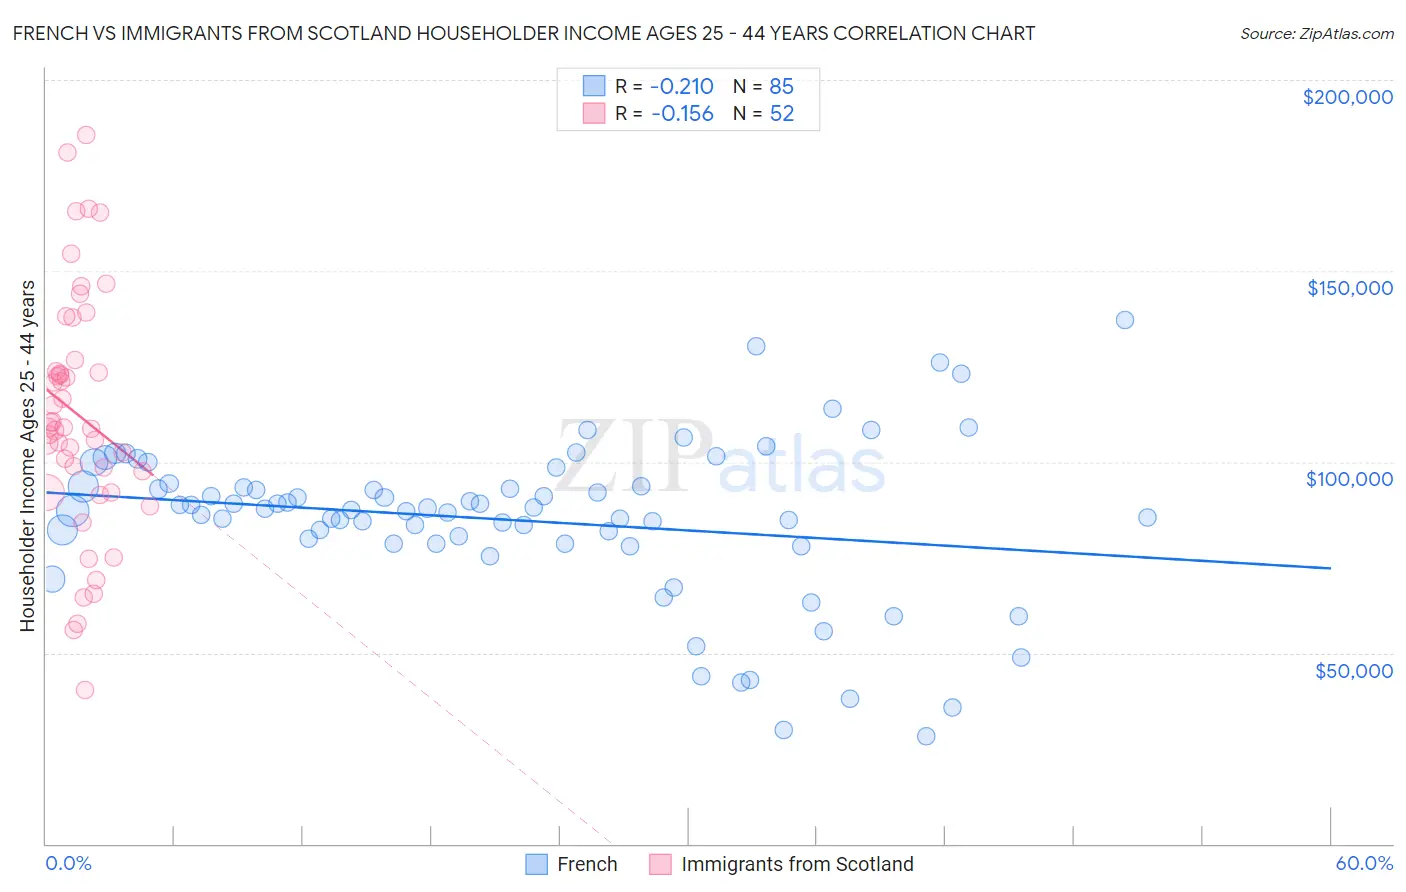 French vs Immigrants from Scotland Householder Income Ages 25 - 44 years